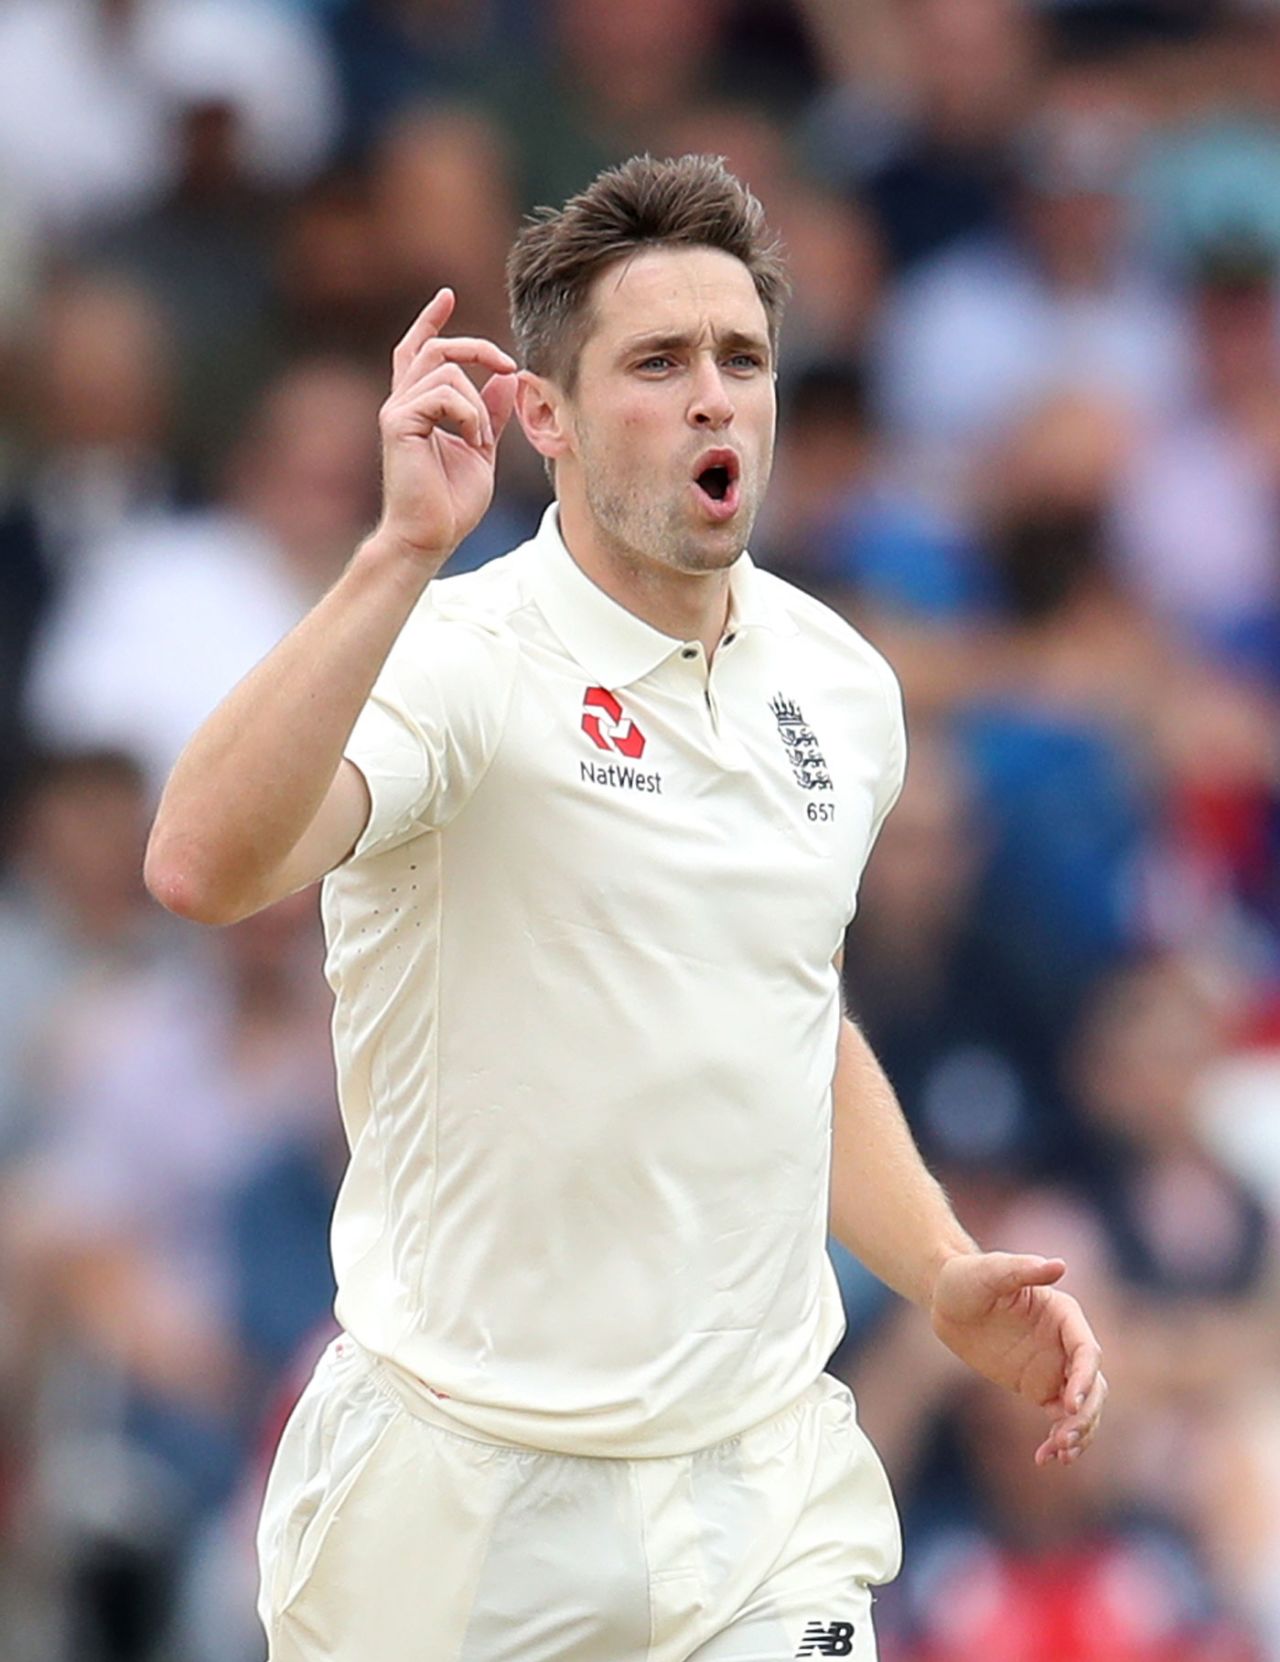 Chris Woakes celebrates a wicket, England v India, 3rd Test, Trent Bridge, 1st day, August 18, 2018